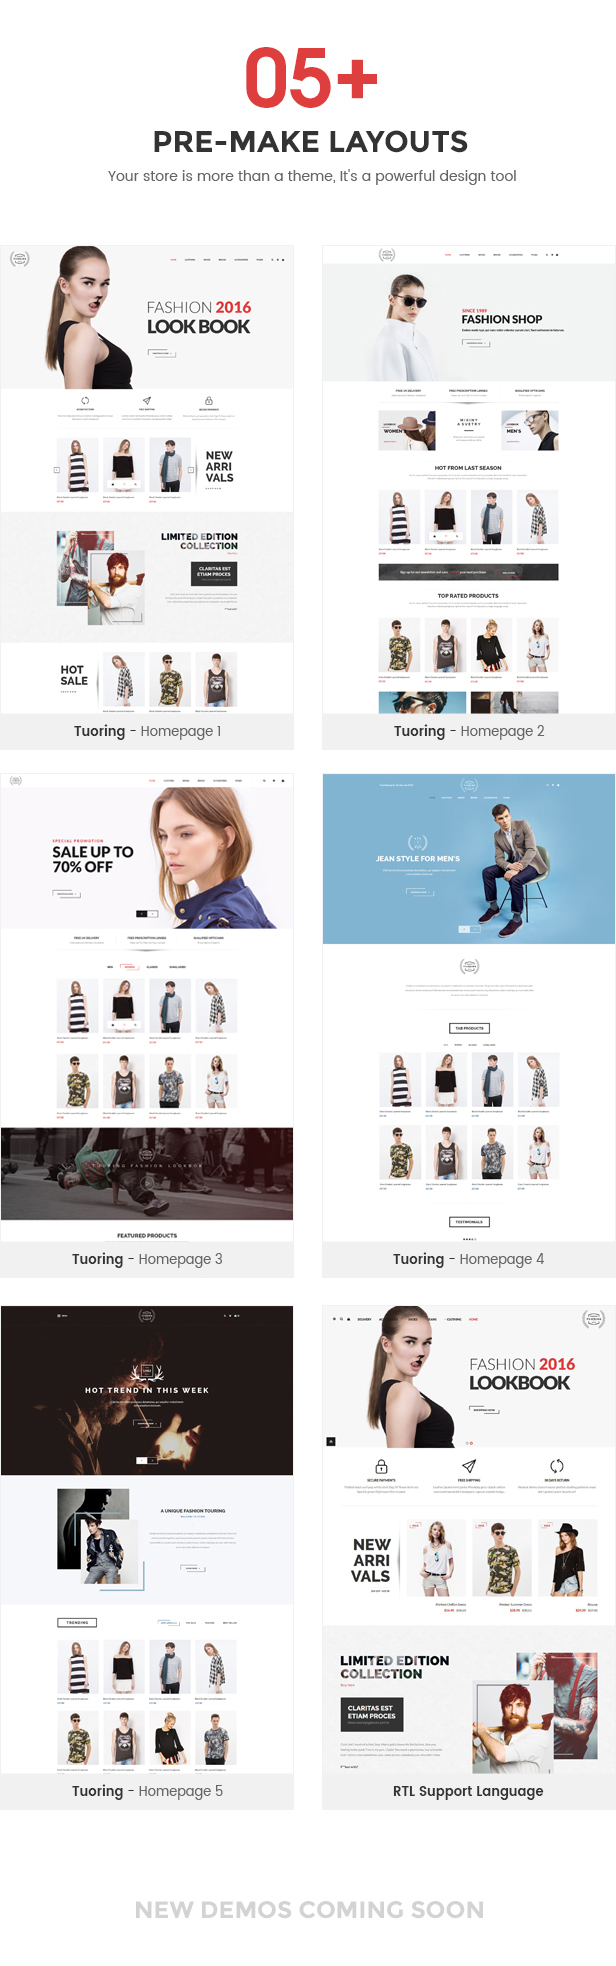 Pages with clothes, style and more on the website template.